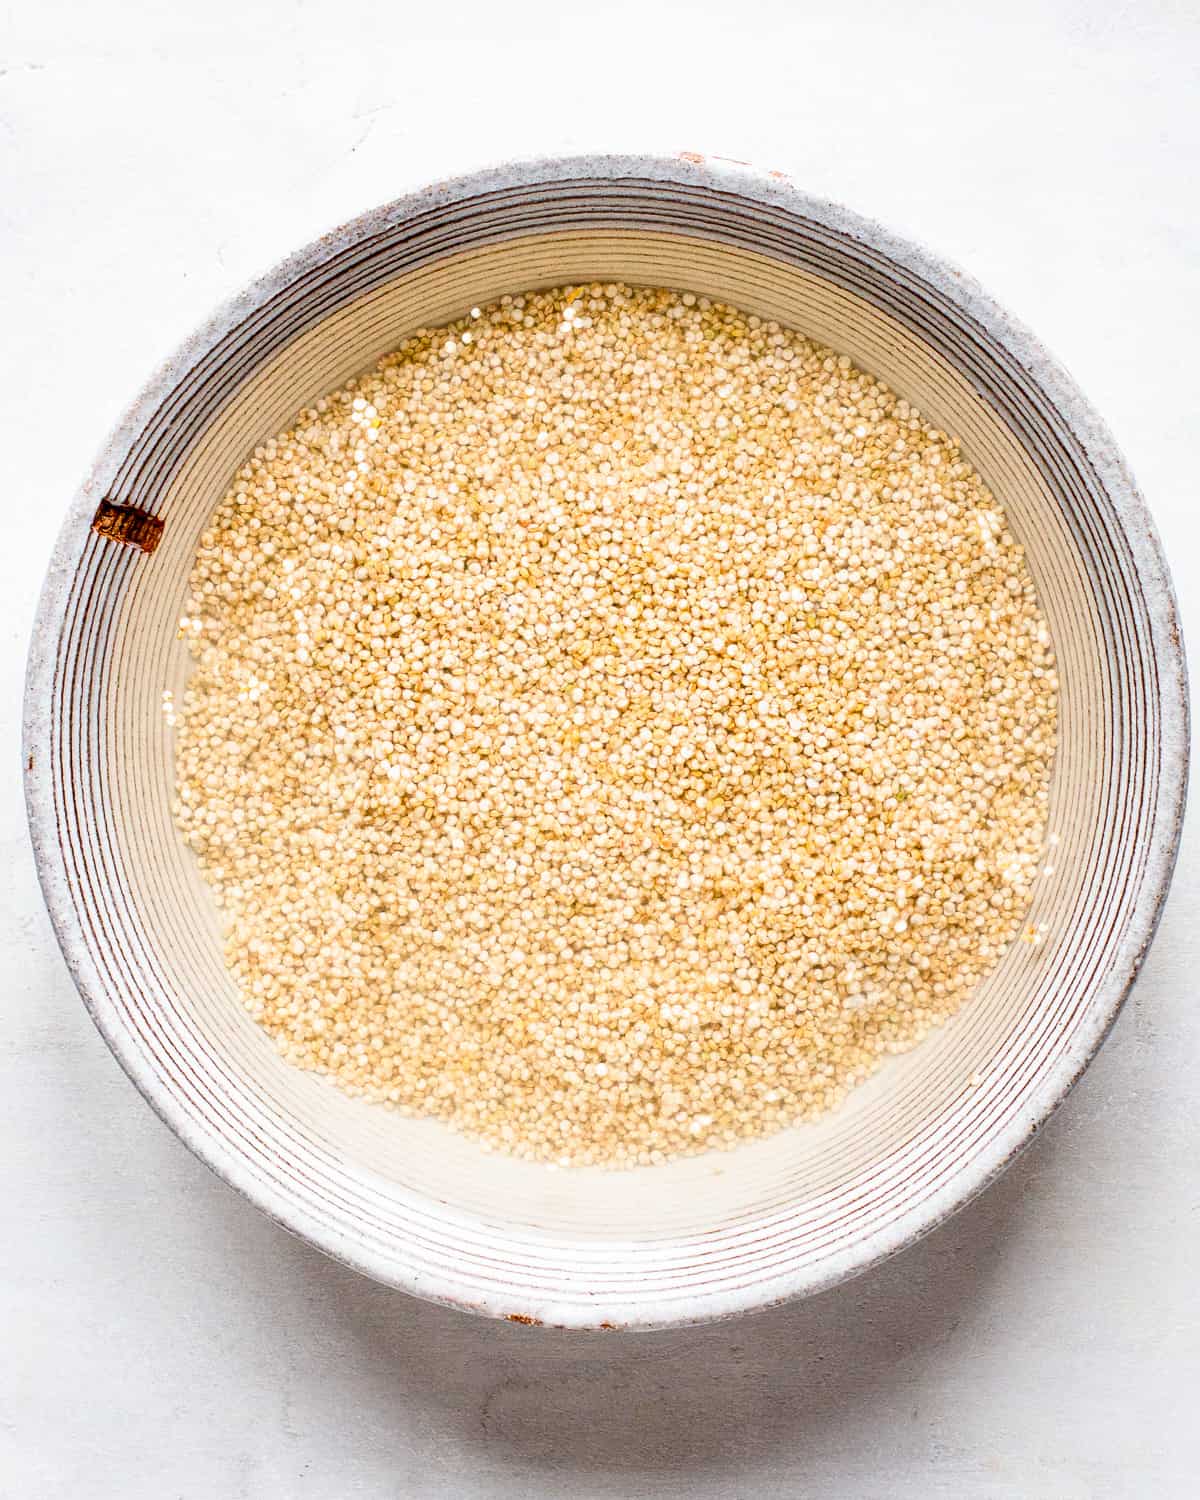 Quinoa soaked in water in a grey ceramic bowl.